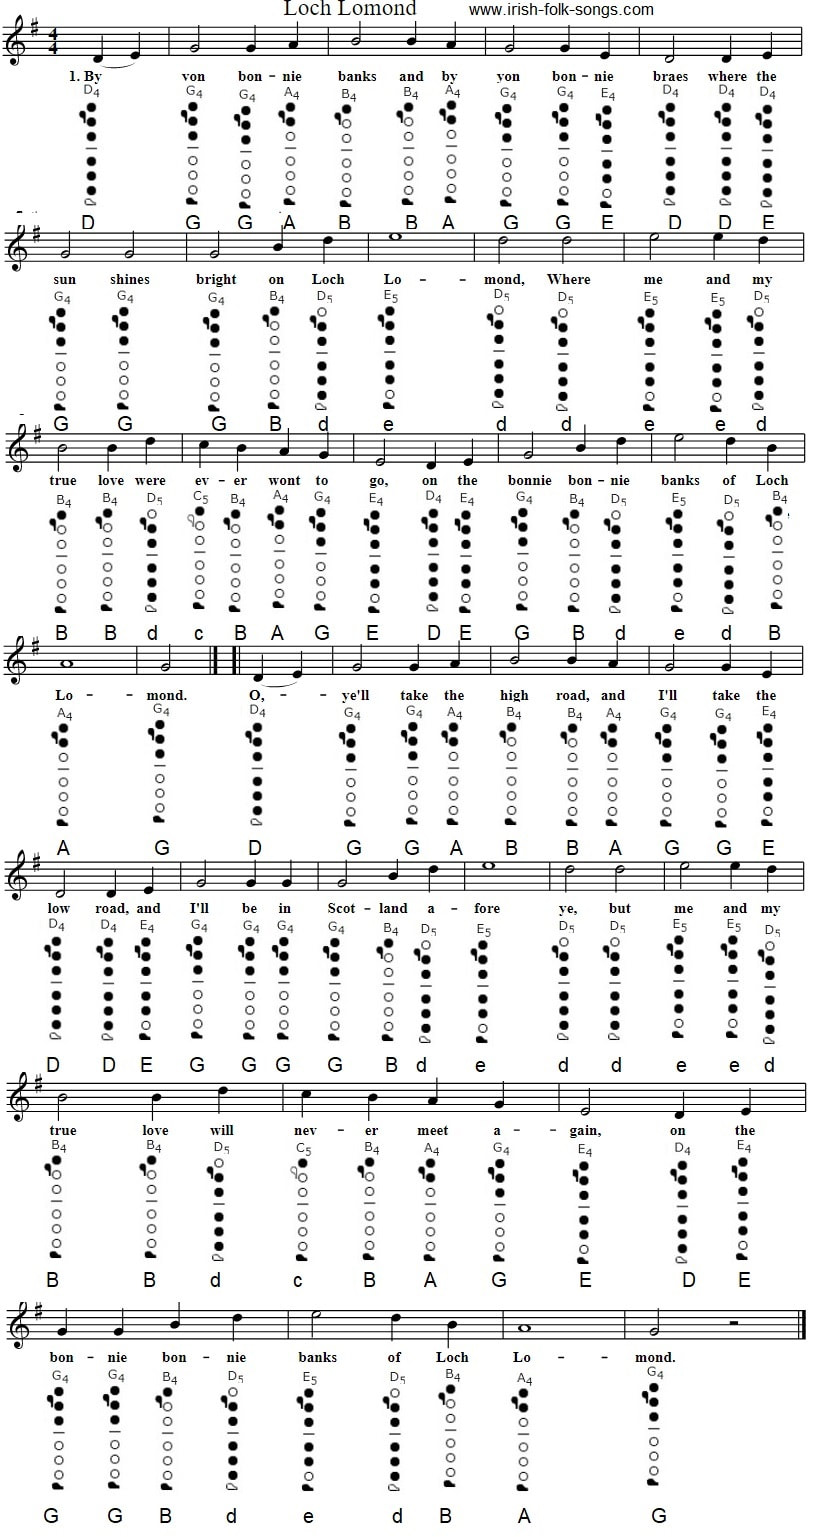 Loch Lomond flute sheet music with letter notes